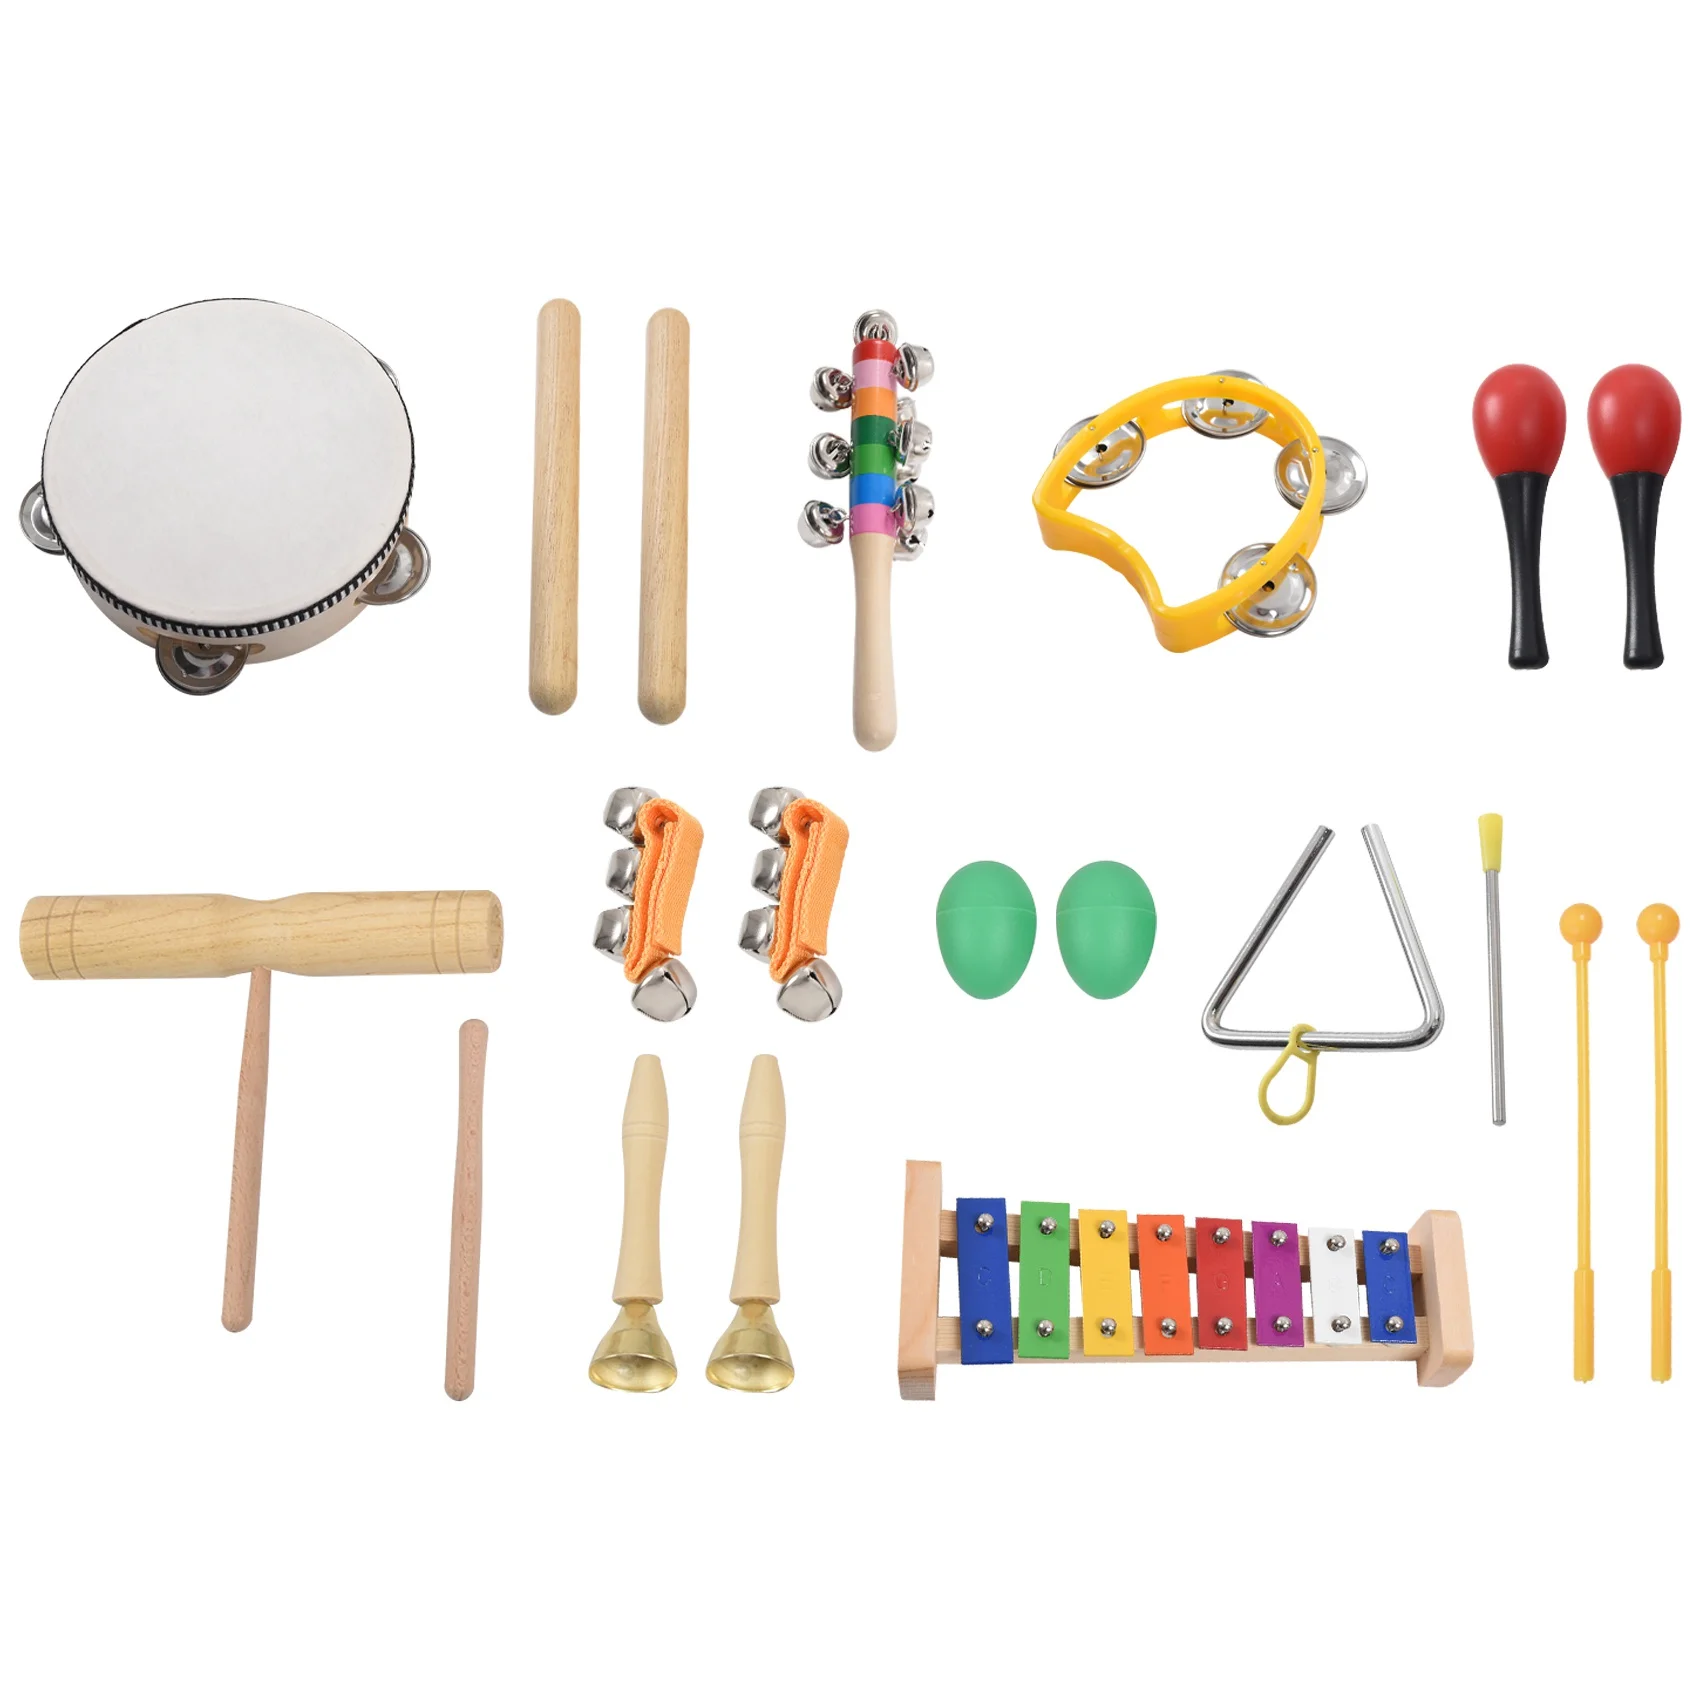 

20 Pcs Toddler & Baby Musical Instruments Set - Percussion Toy Fun Toddlers Toys Wooden Xylophone Glockenspiel Toy Rhythm Band